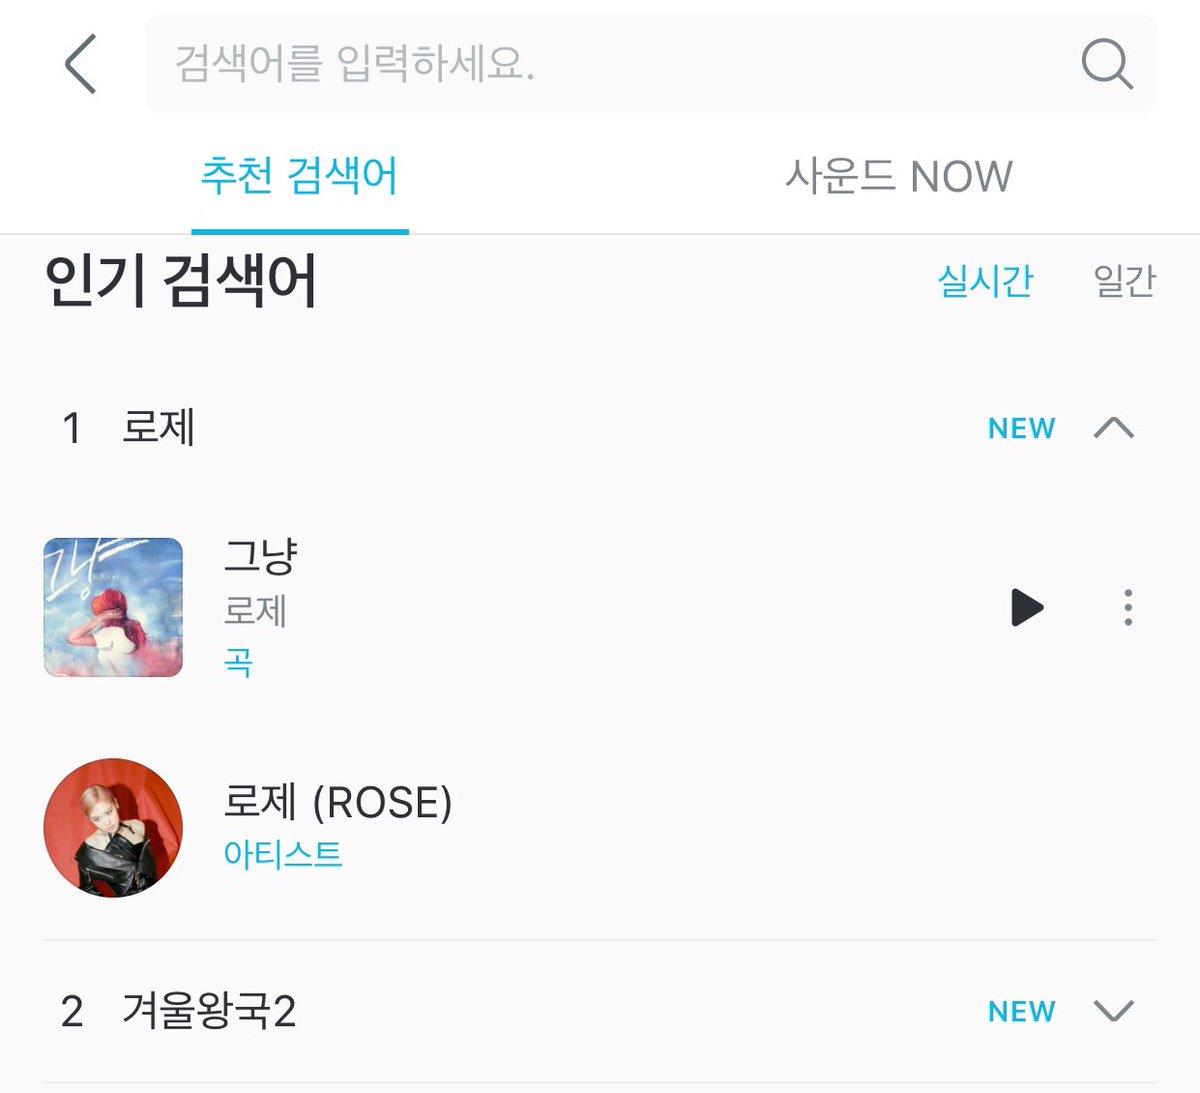 rosé always trending in naver whenever she opens her mouth to sing basically proves how much sk wants to see more of her